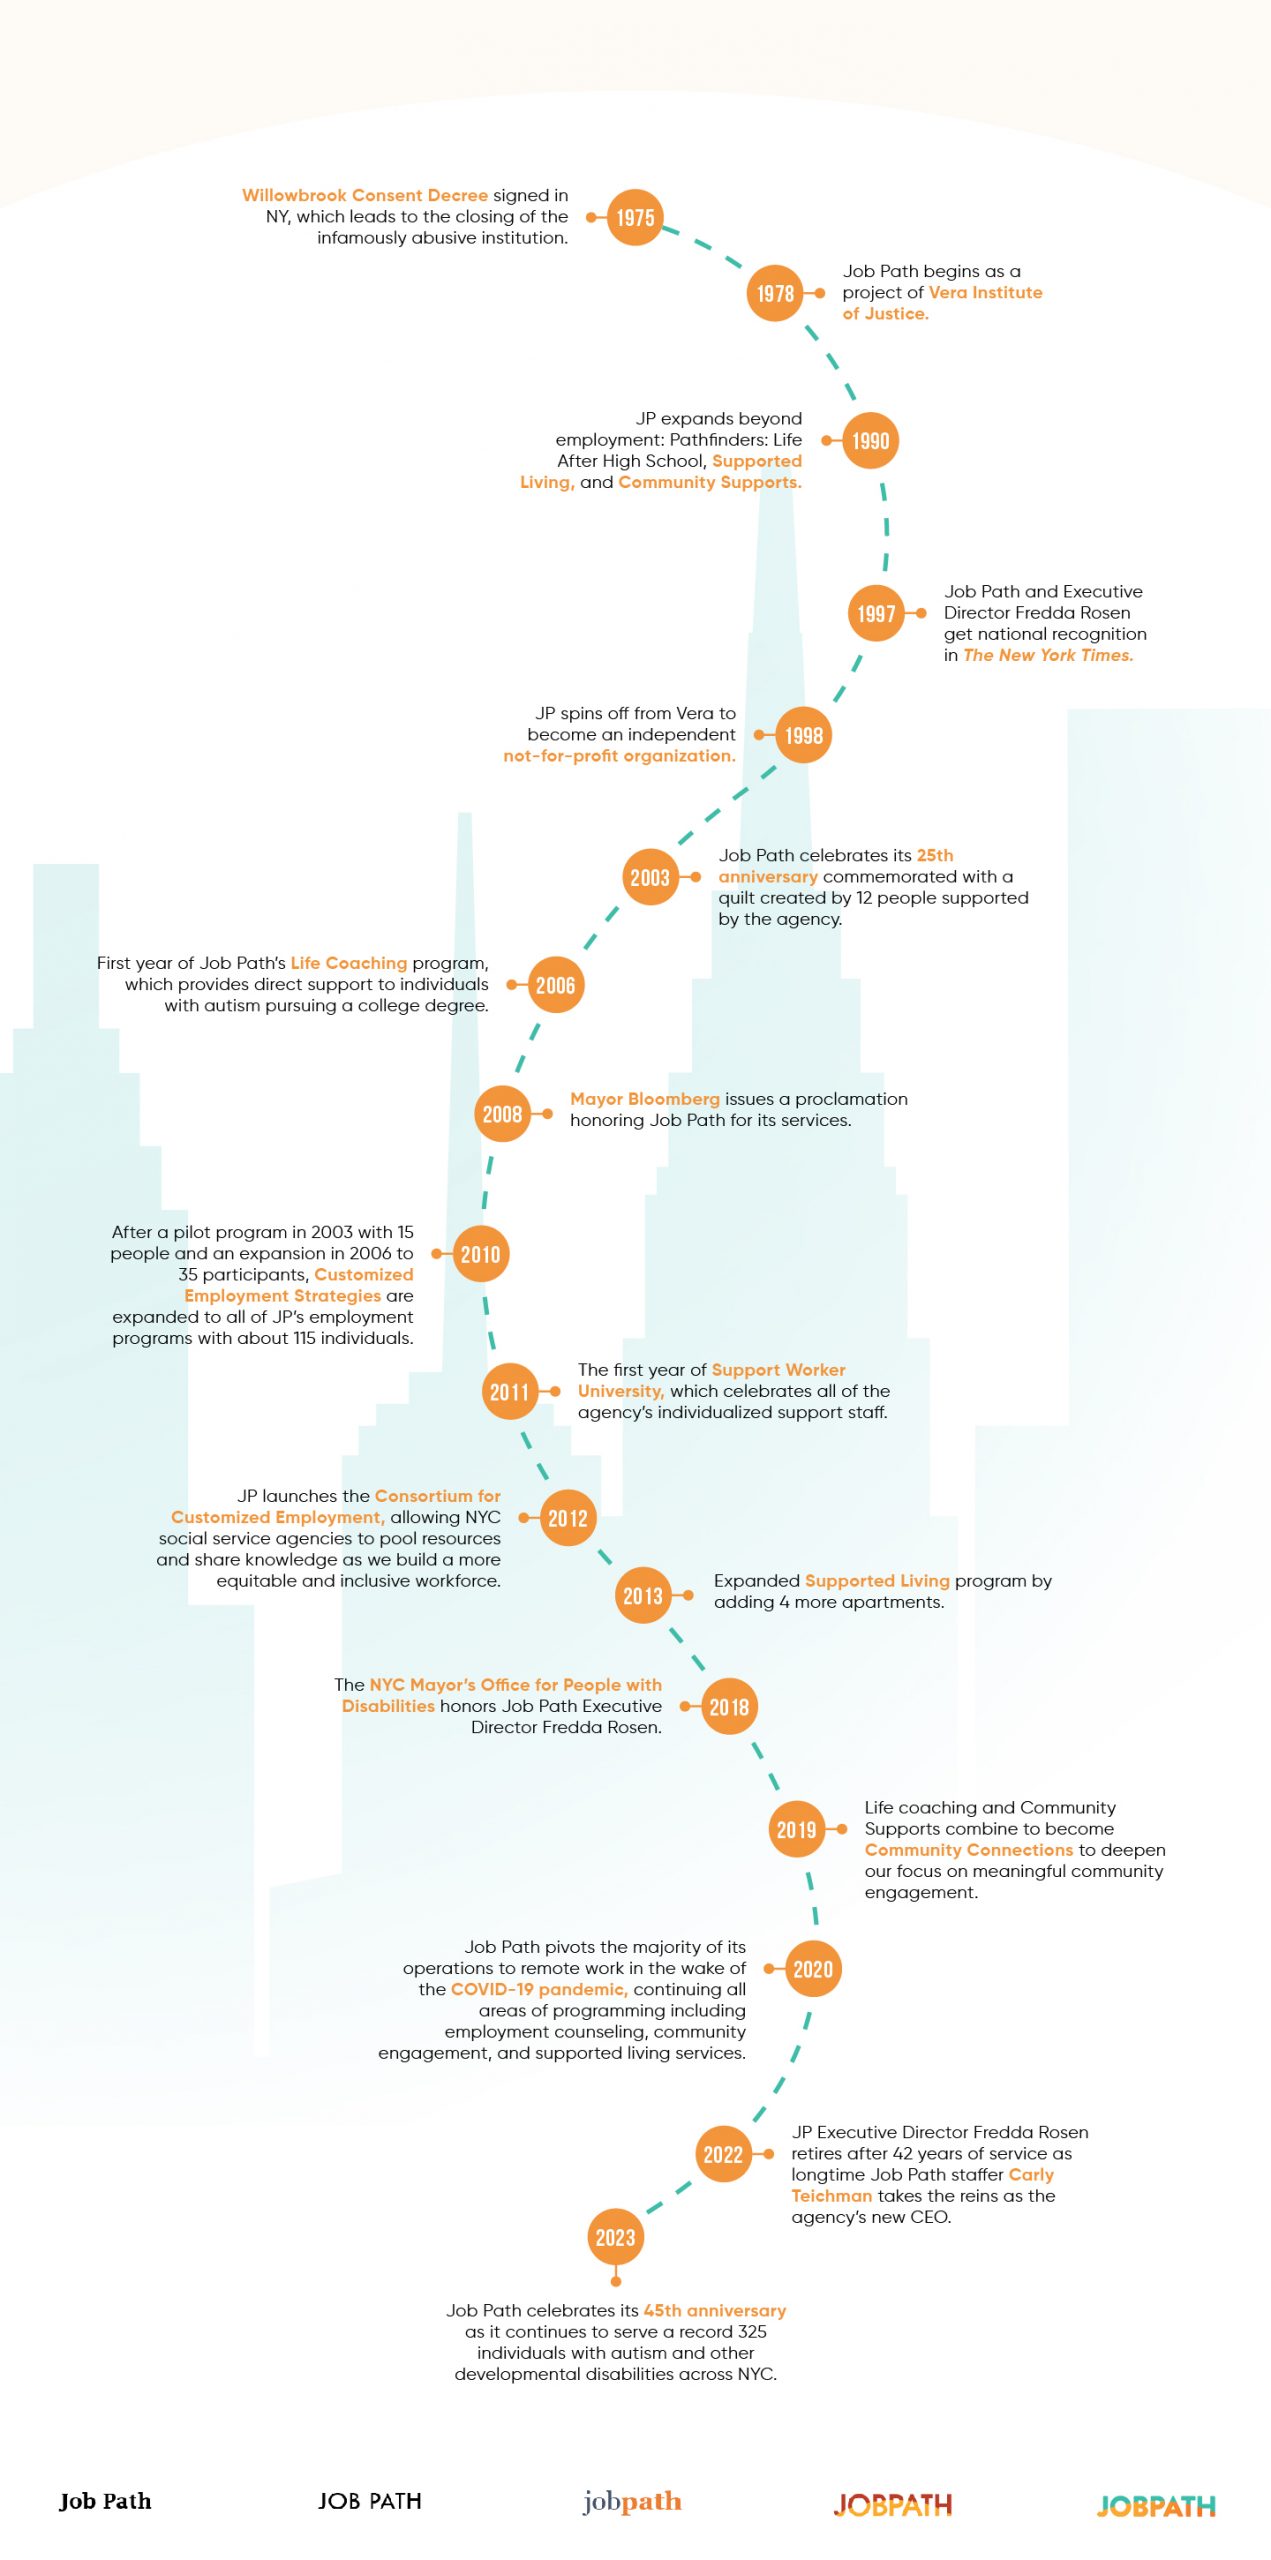 Time line of Job Path history for 43 years